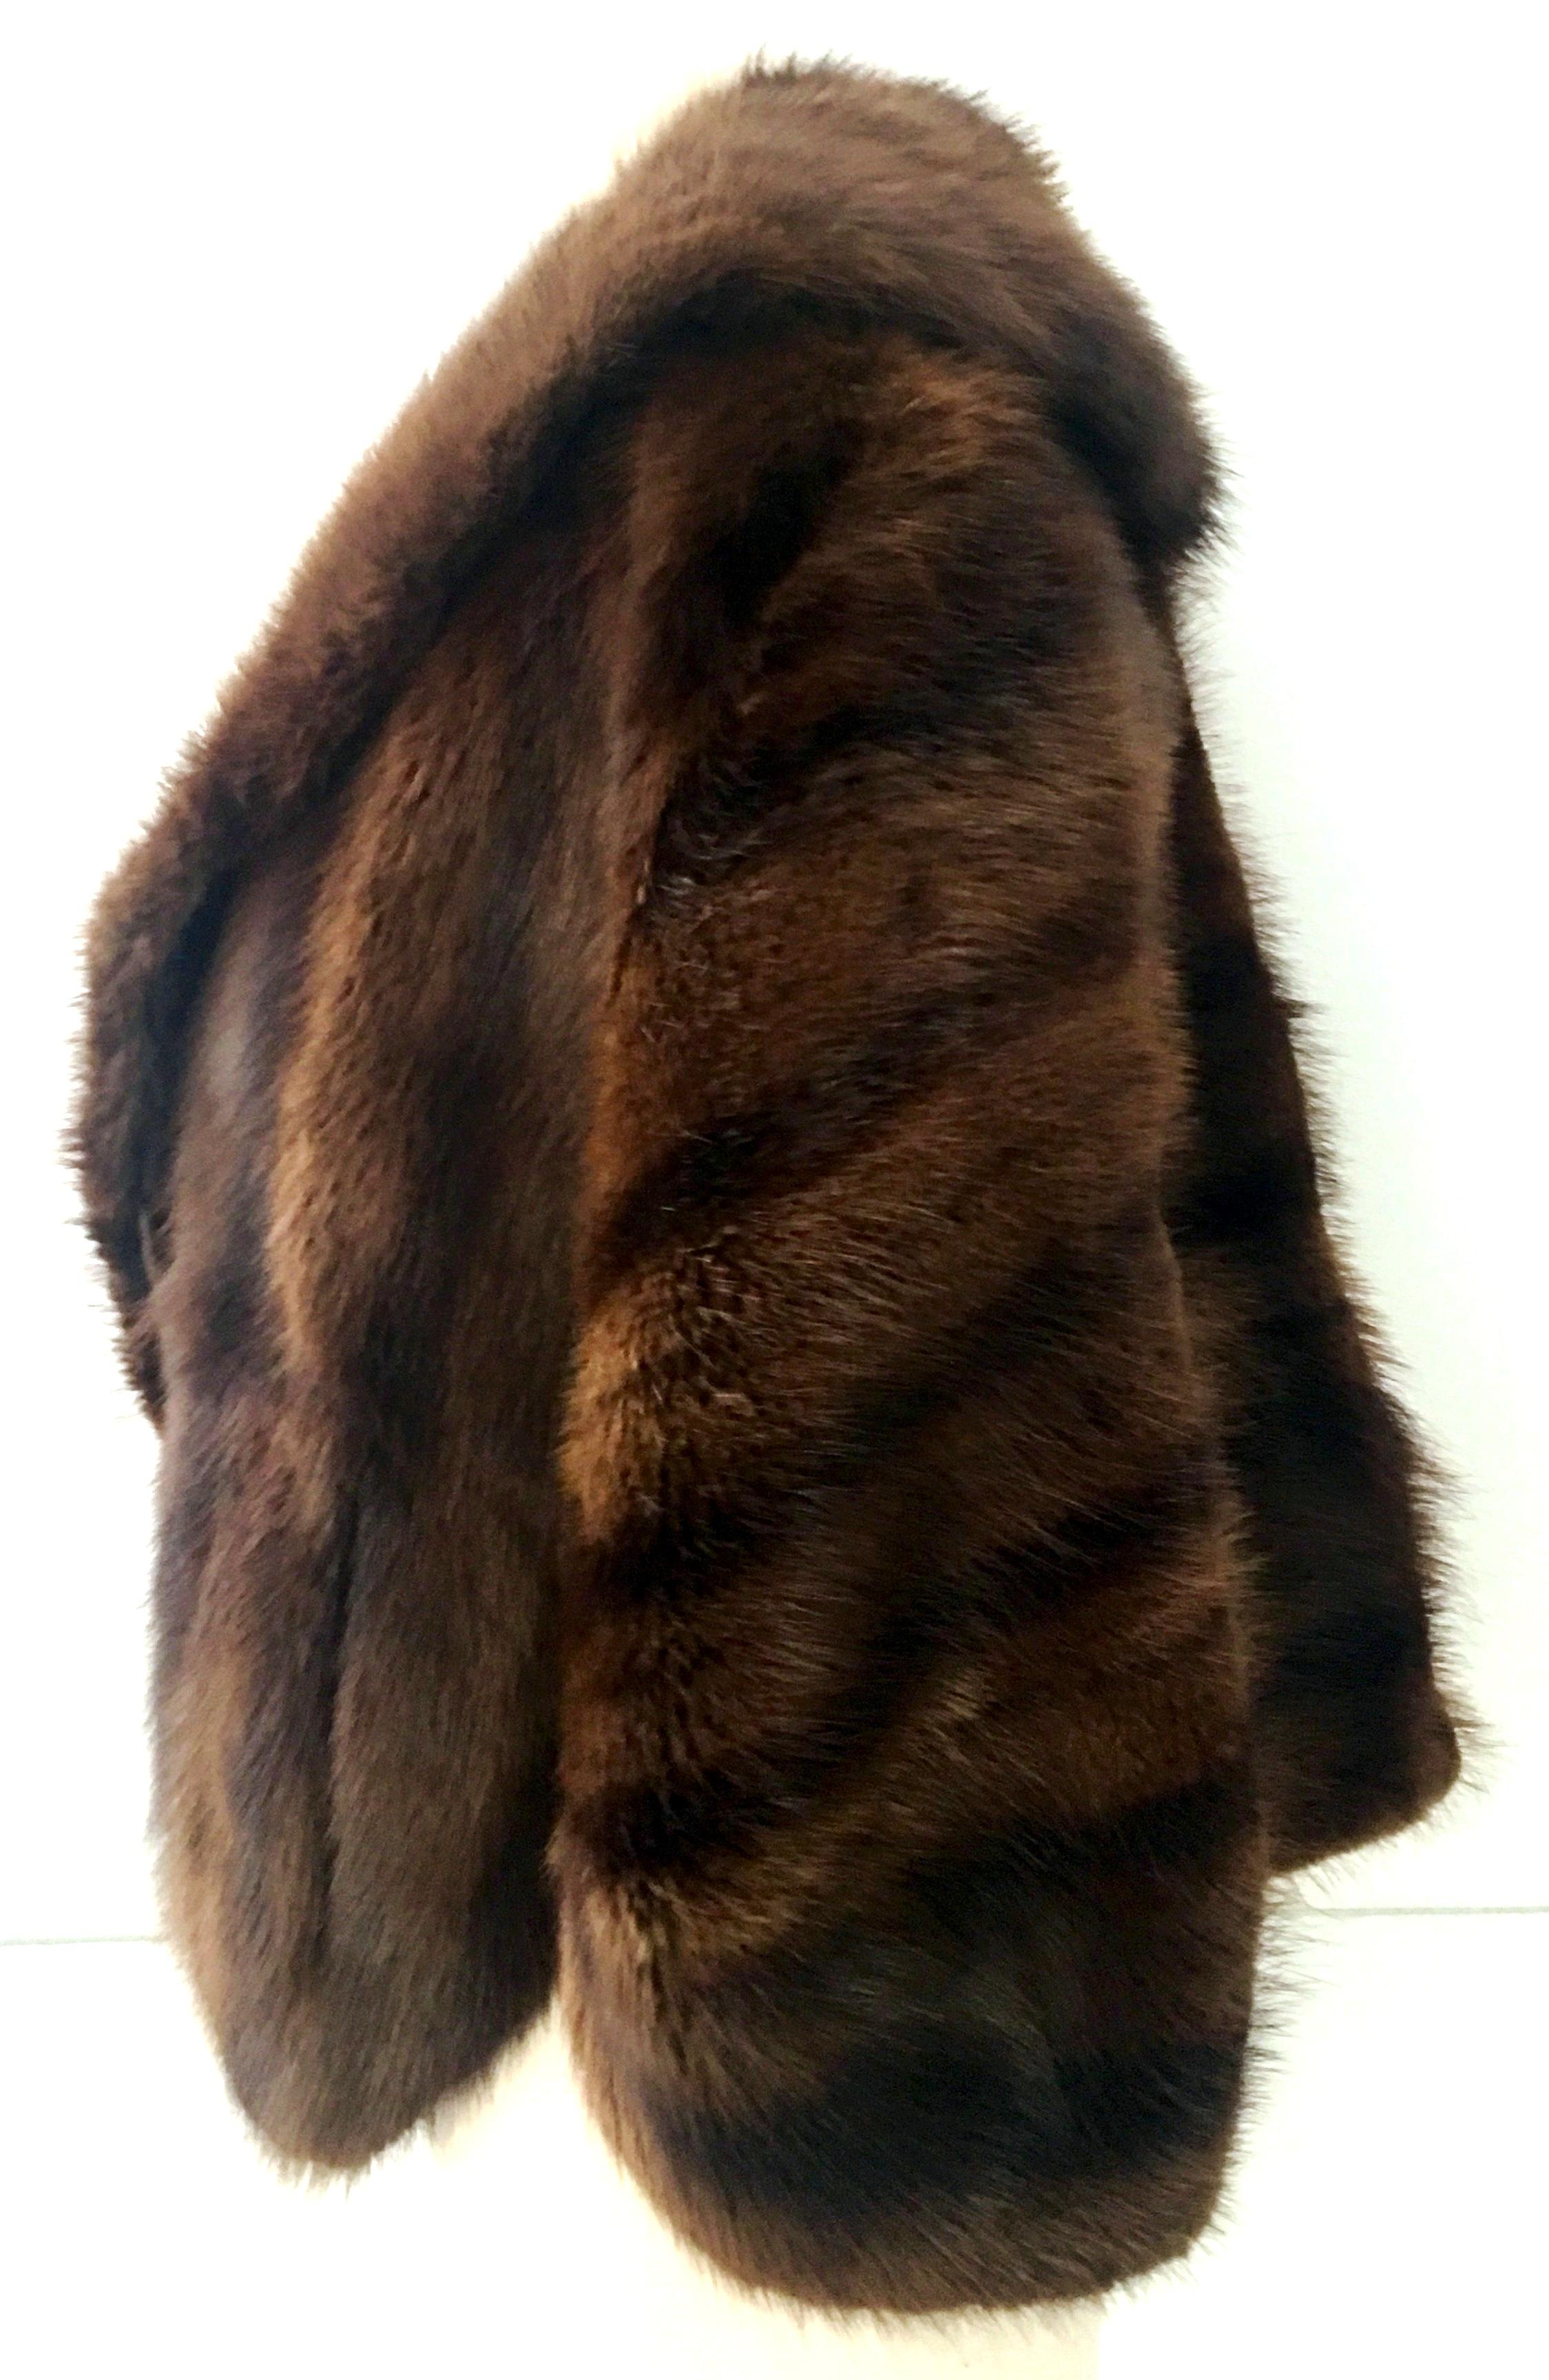 1960'S Mink Fur Capelet By, Joseph Noonan Furs. This fine quality, high sheen soft and luxurious mink capelet features a generous roll over collar and two exterior side pockets. Fully lined with the original furrier tag in tact, Joeseph Noonan